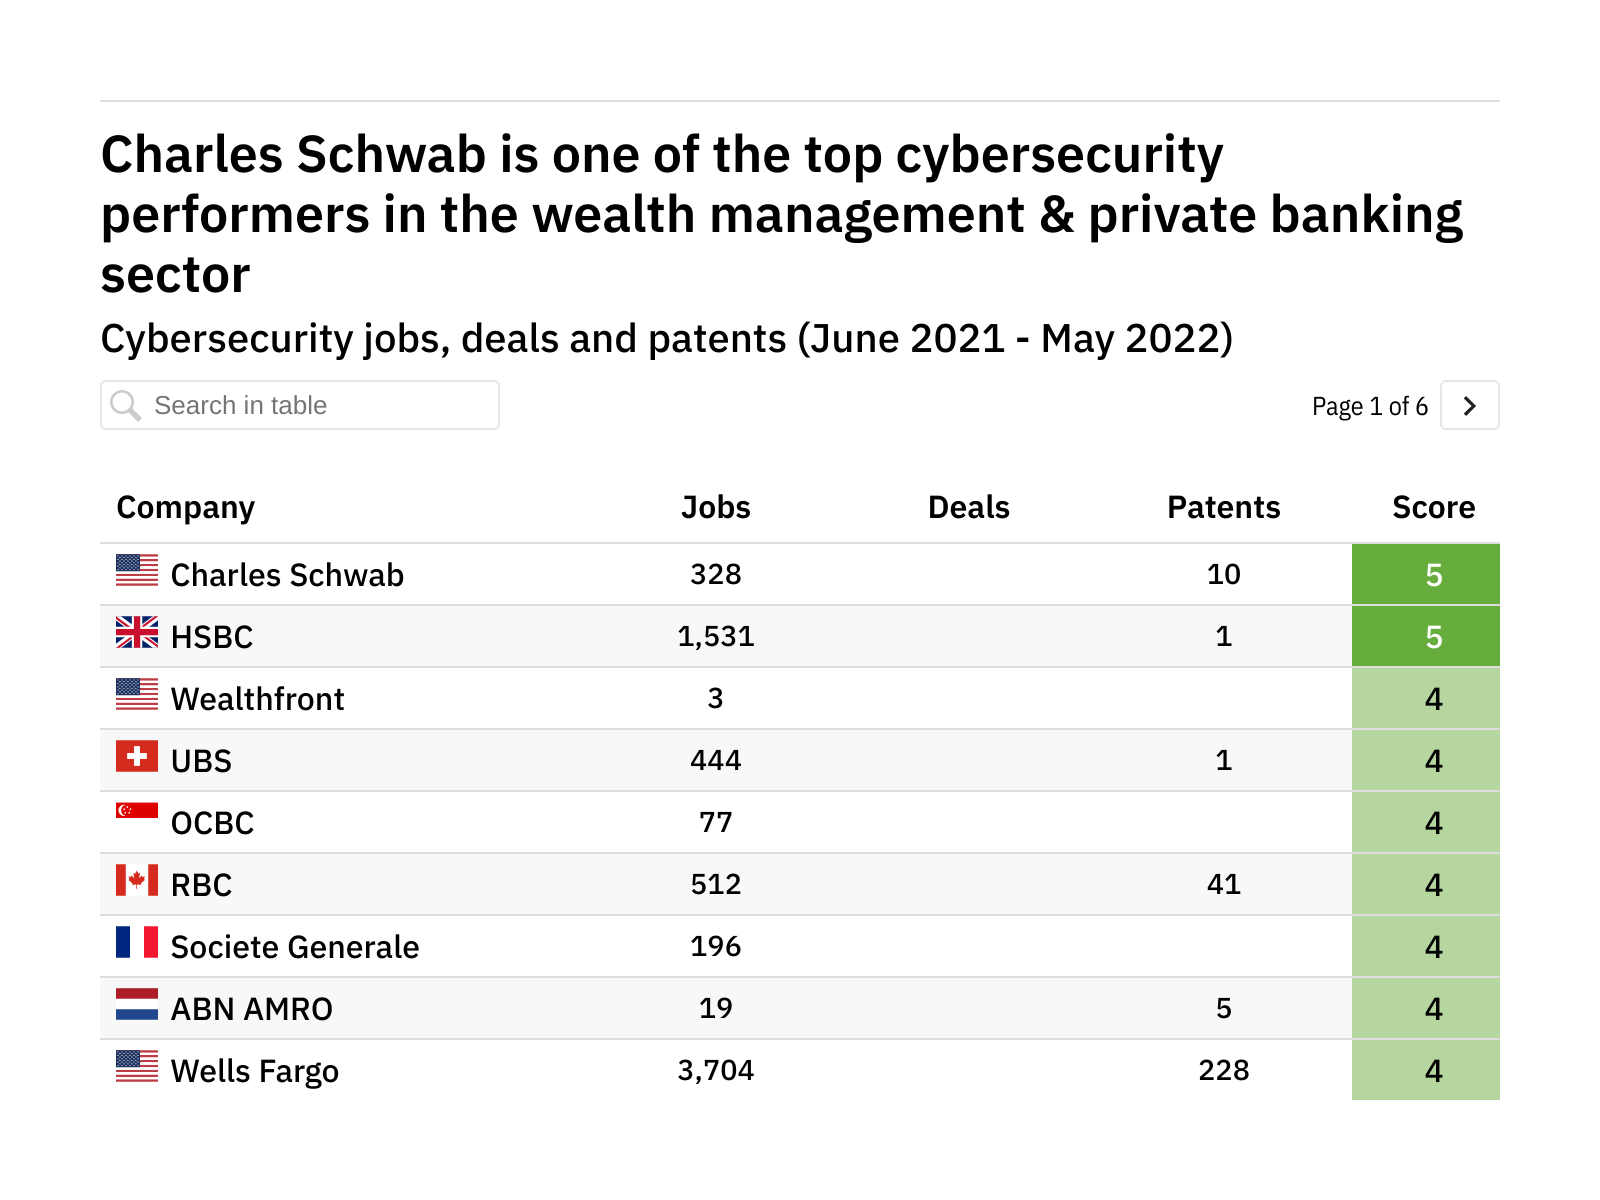 Revealed: The wealth management & private banking companies leading the way in cybersecurity